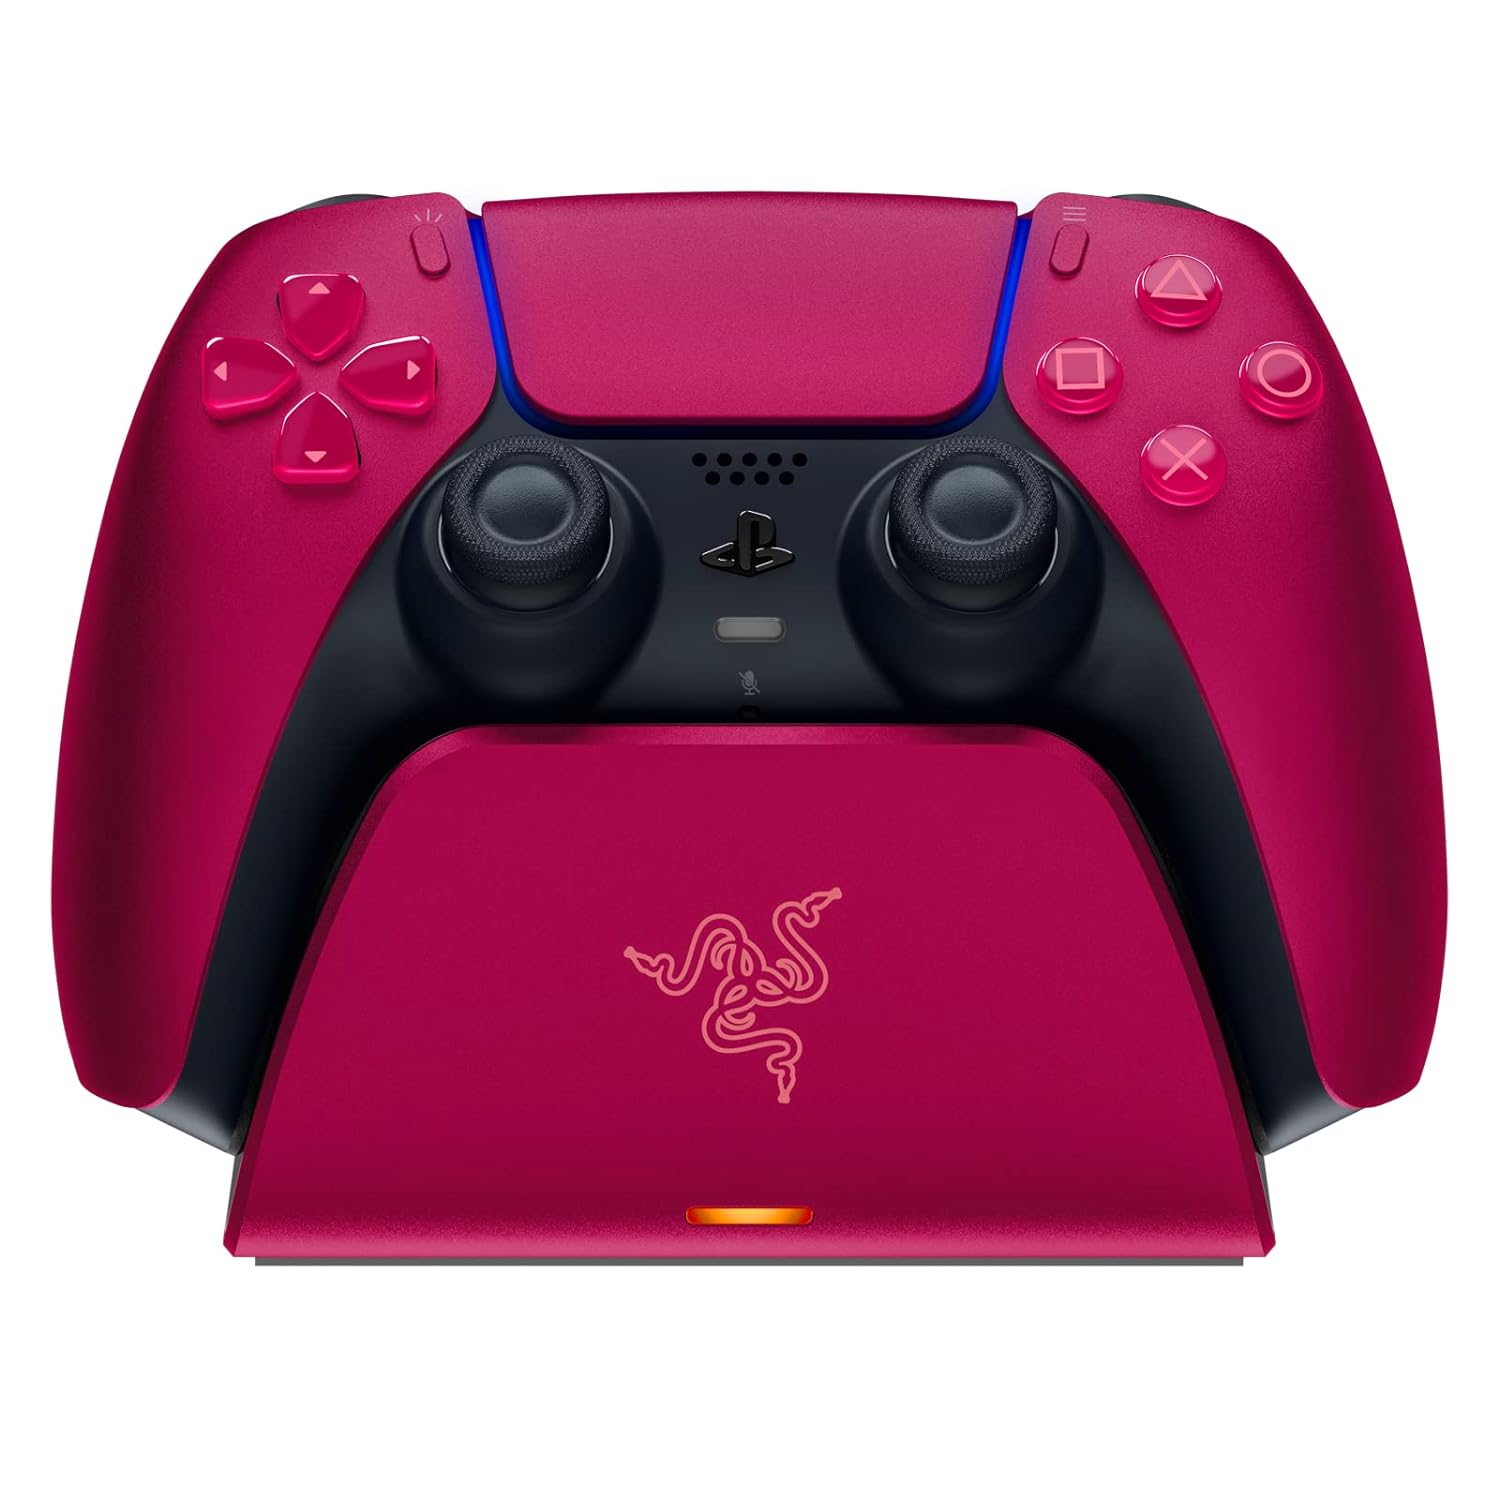 Razer Quick Charging Stand for PlayStation 5: Quick Charge - Curved Cradle Design - Matches PS5 DualSense Wireless Controller - One-Handed Navigation - USB Powered - Red (Controller Sold Separately)